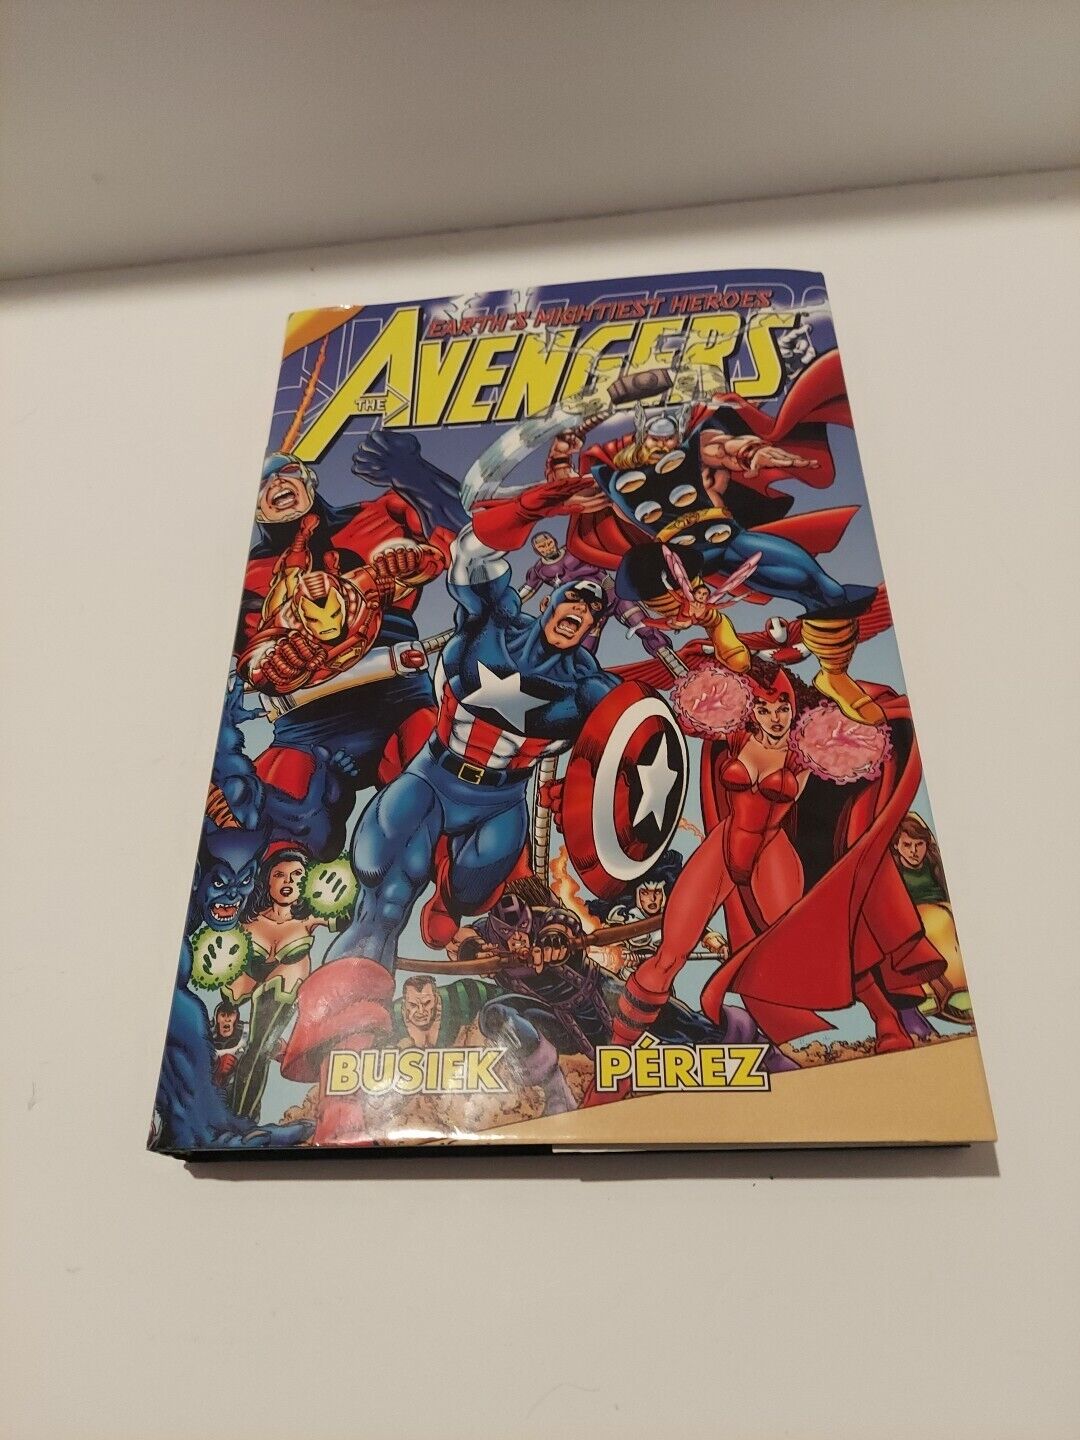 Avengers Assemble Vol 1 By Kurt Busiek and George Perez Hardcover 2004 Book